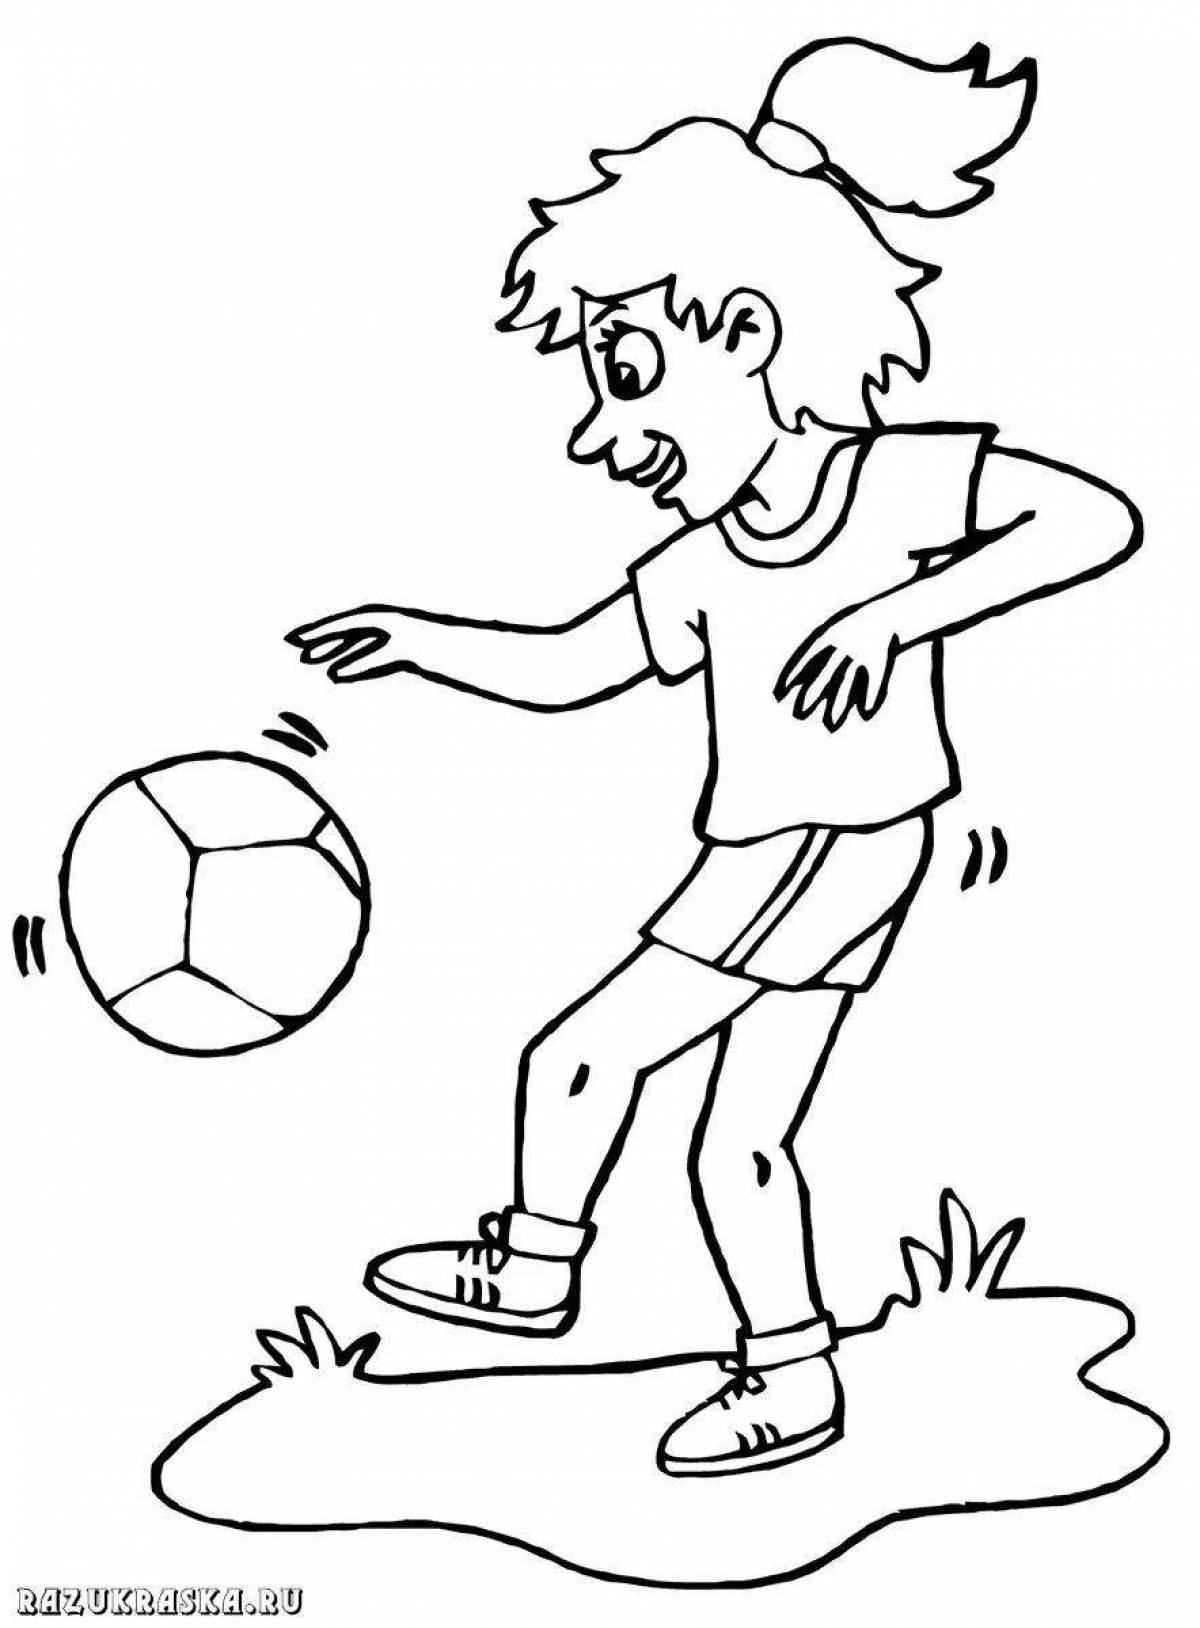 Entertainment coloring book health and sports